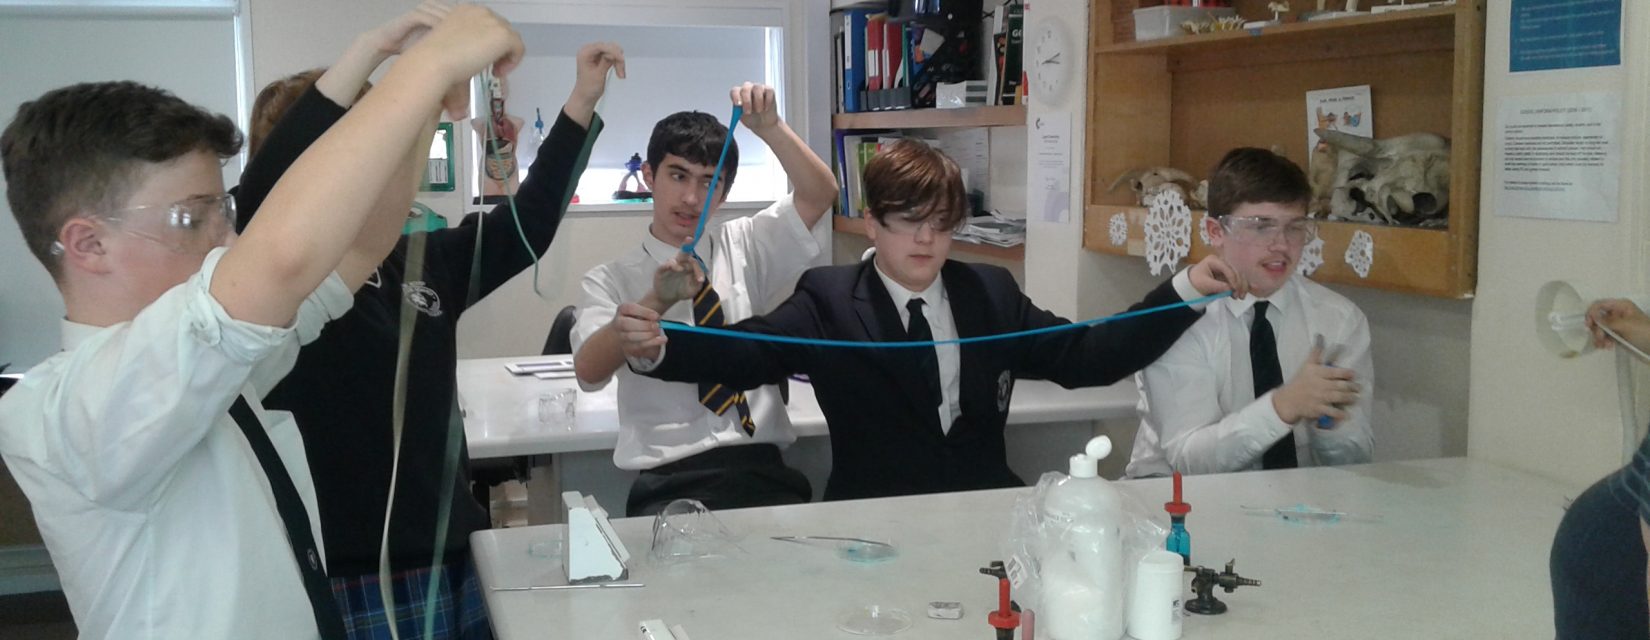 students pulling a blue substance